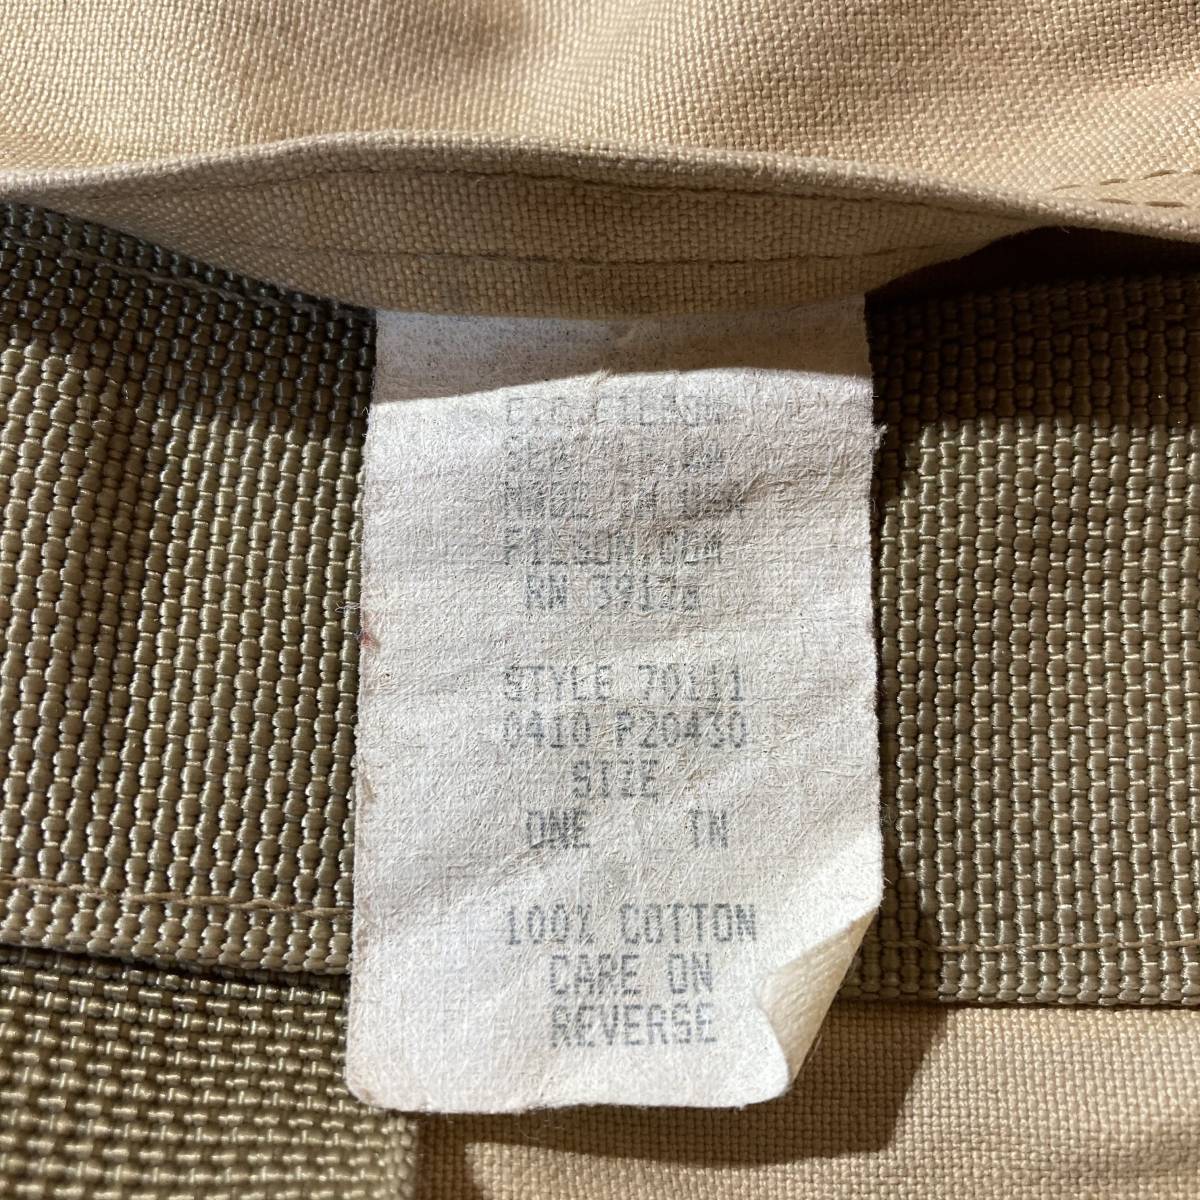 FILSON MADE IN USA STYLE 70111 tote bag old tag 